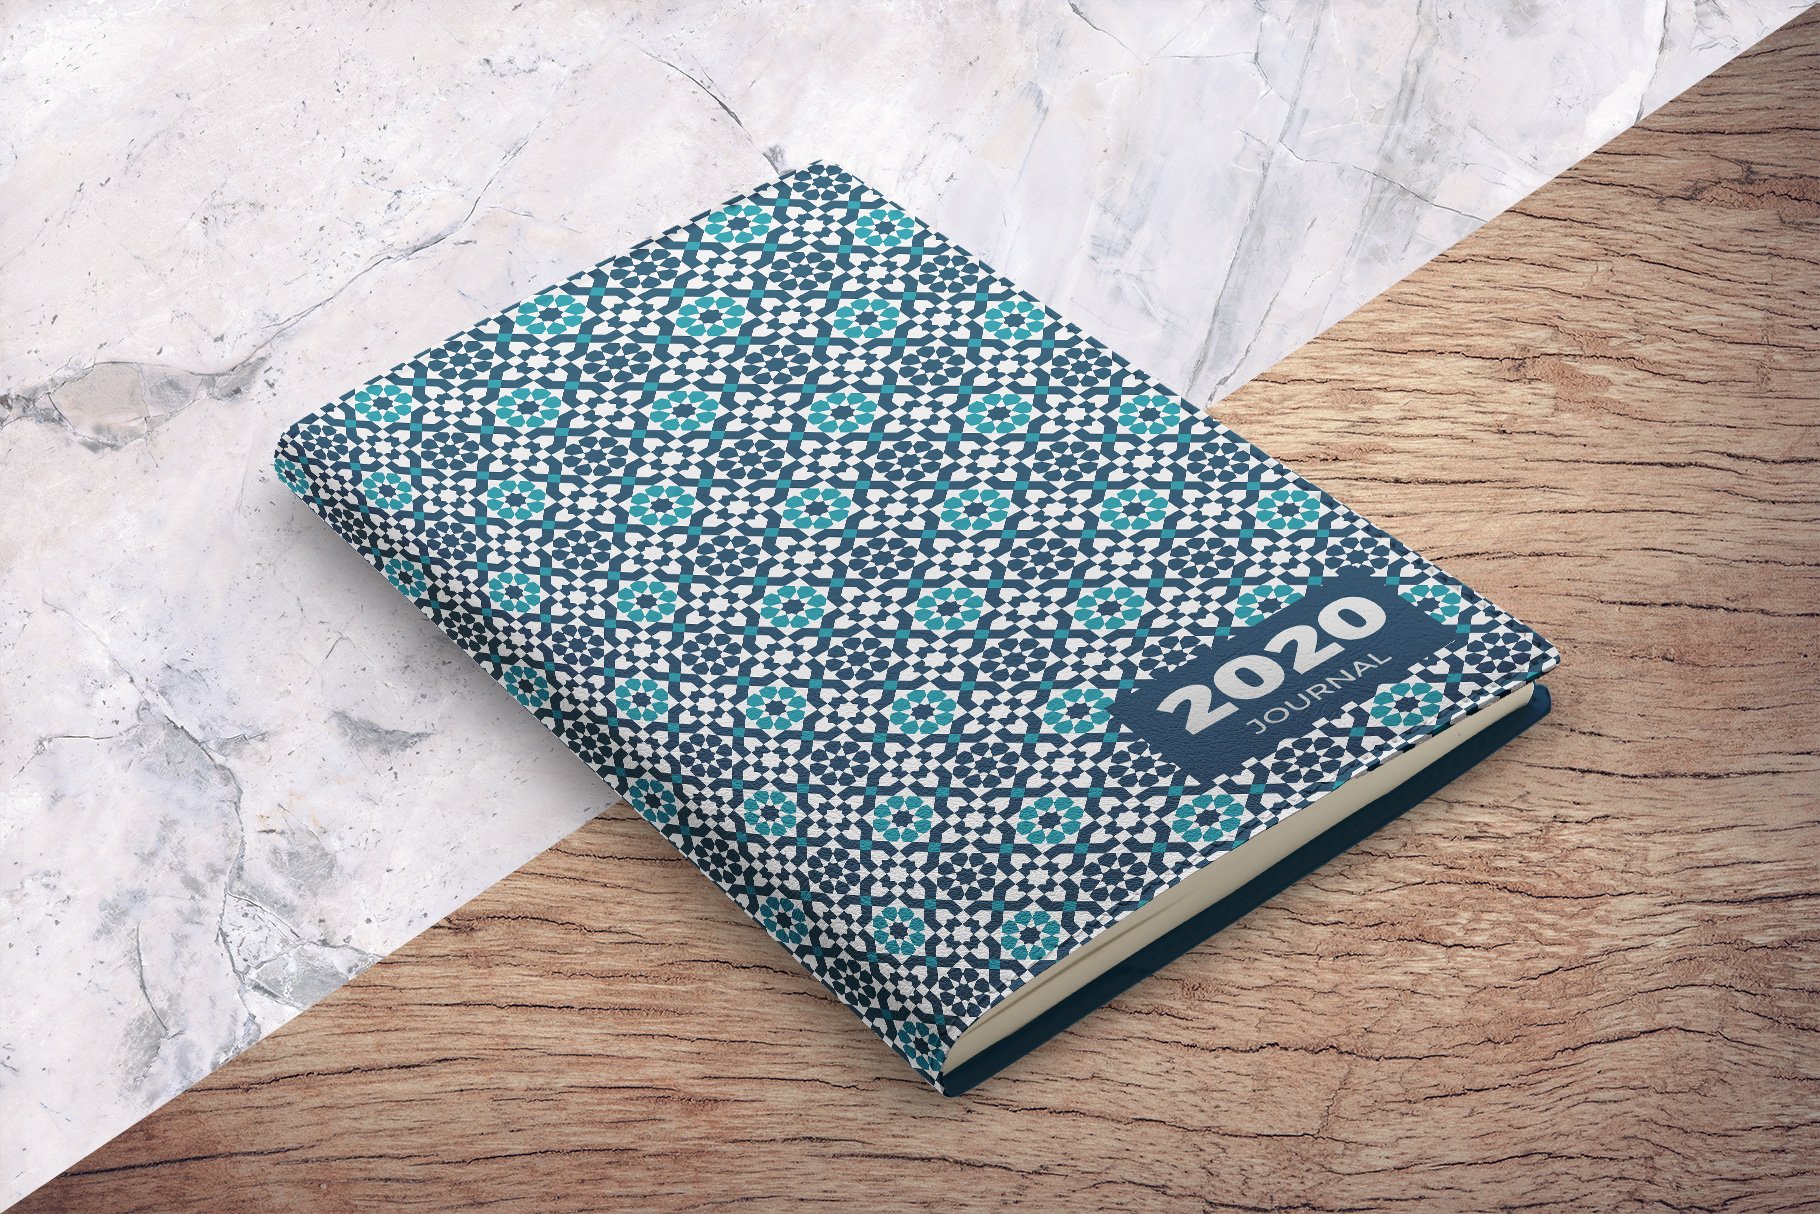 Leather Bind Journal Cover Mockup